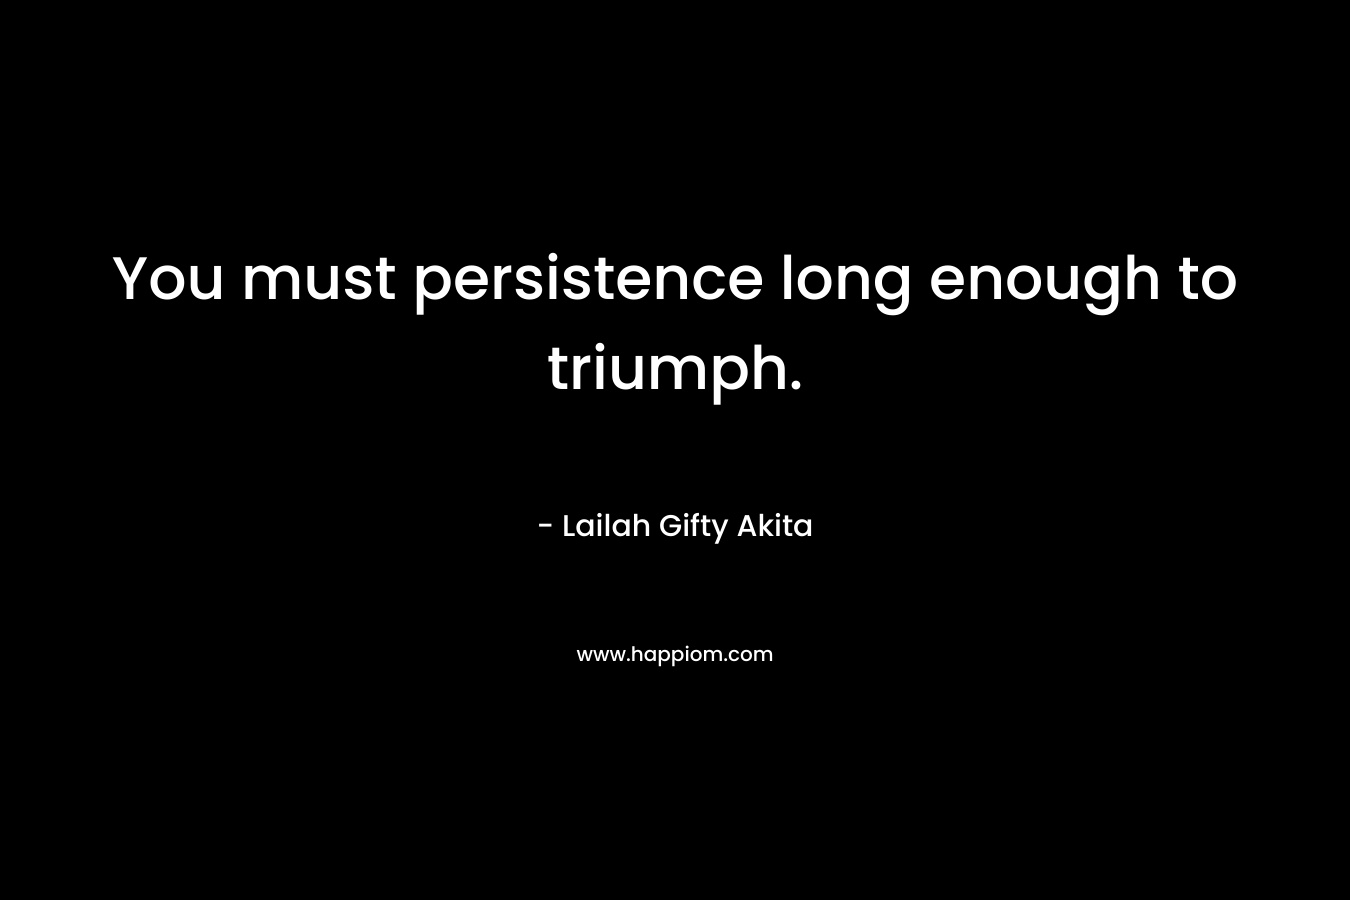 You must persistence long enough to triumph.